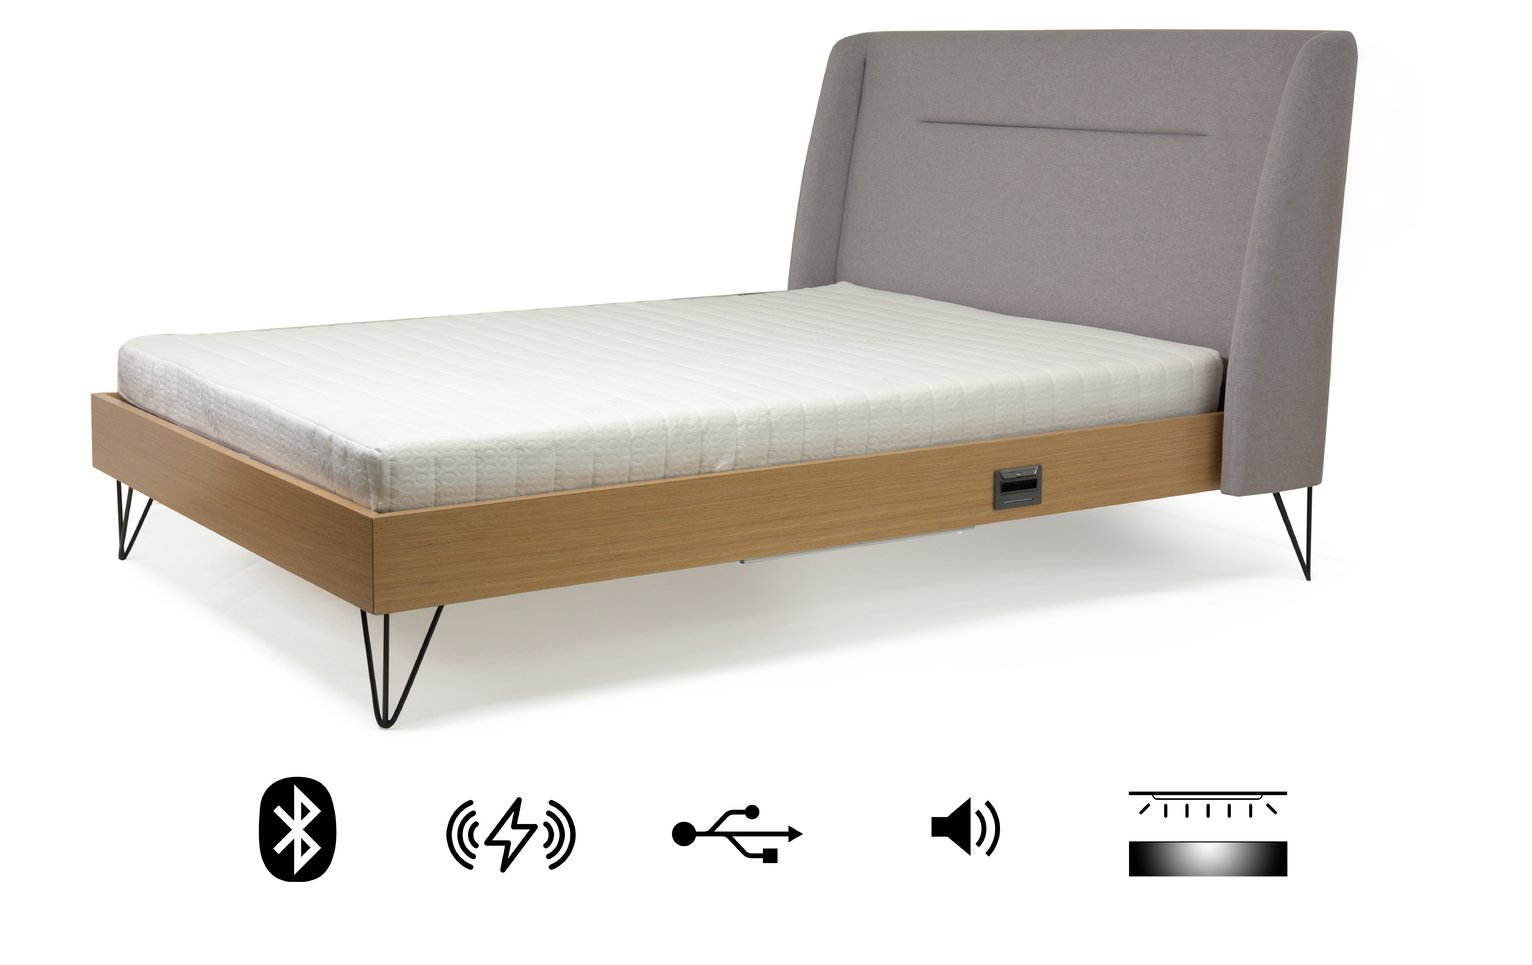 Koble Snor wireless charging Bluetooth Double Bed Frame